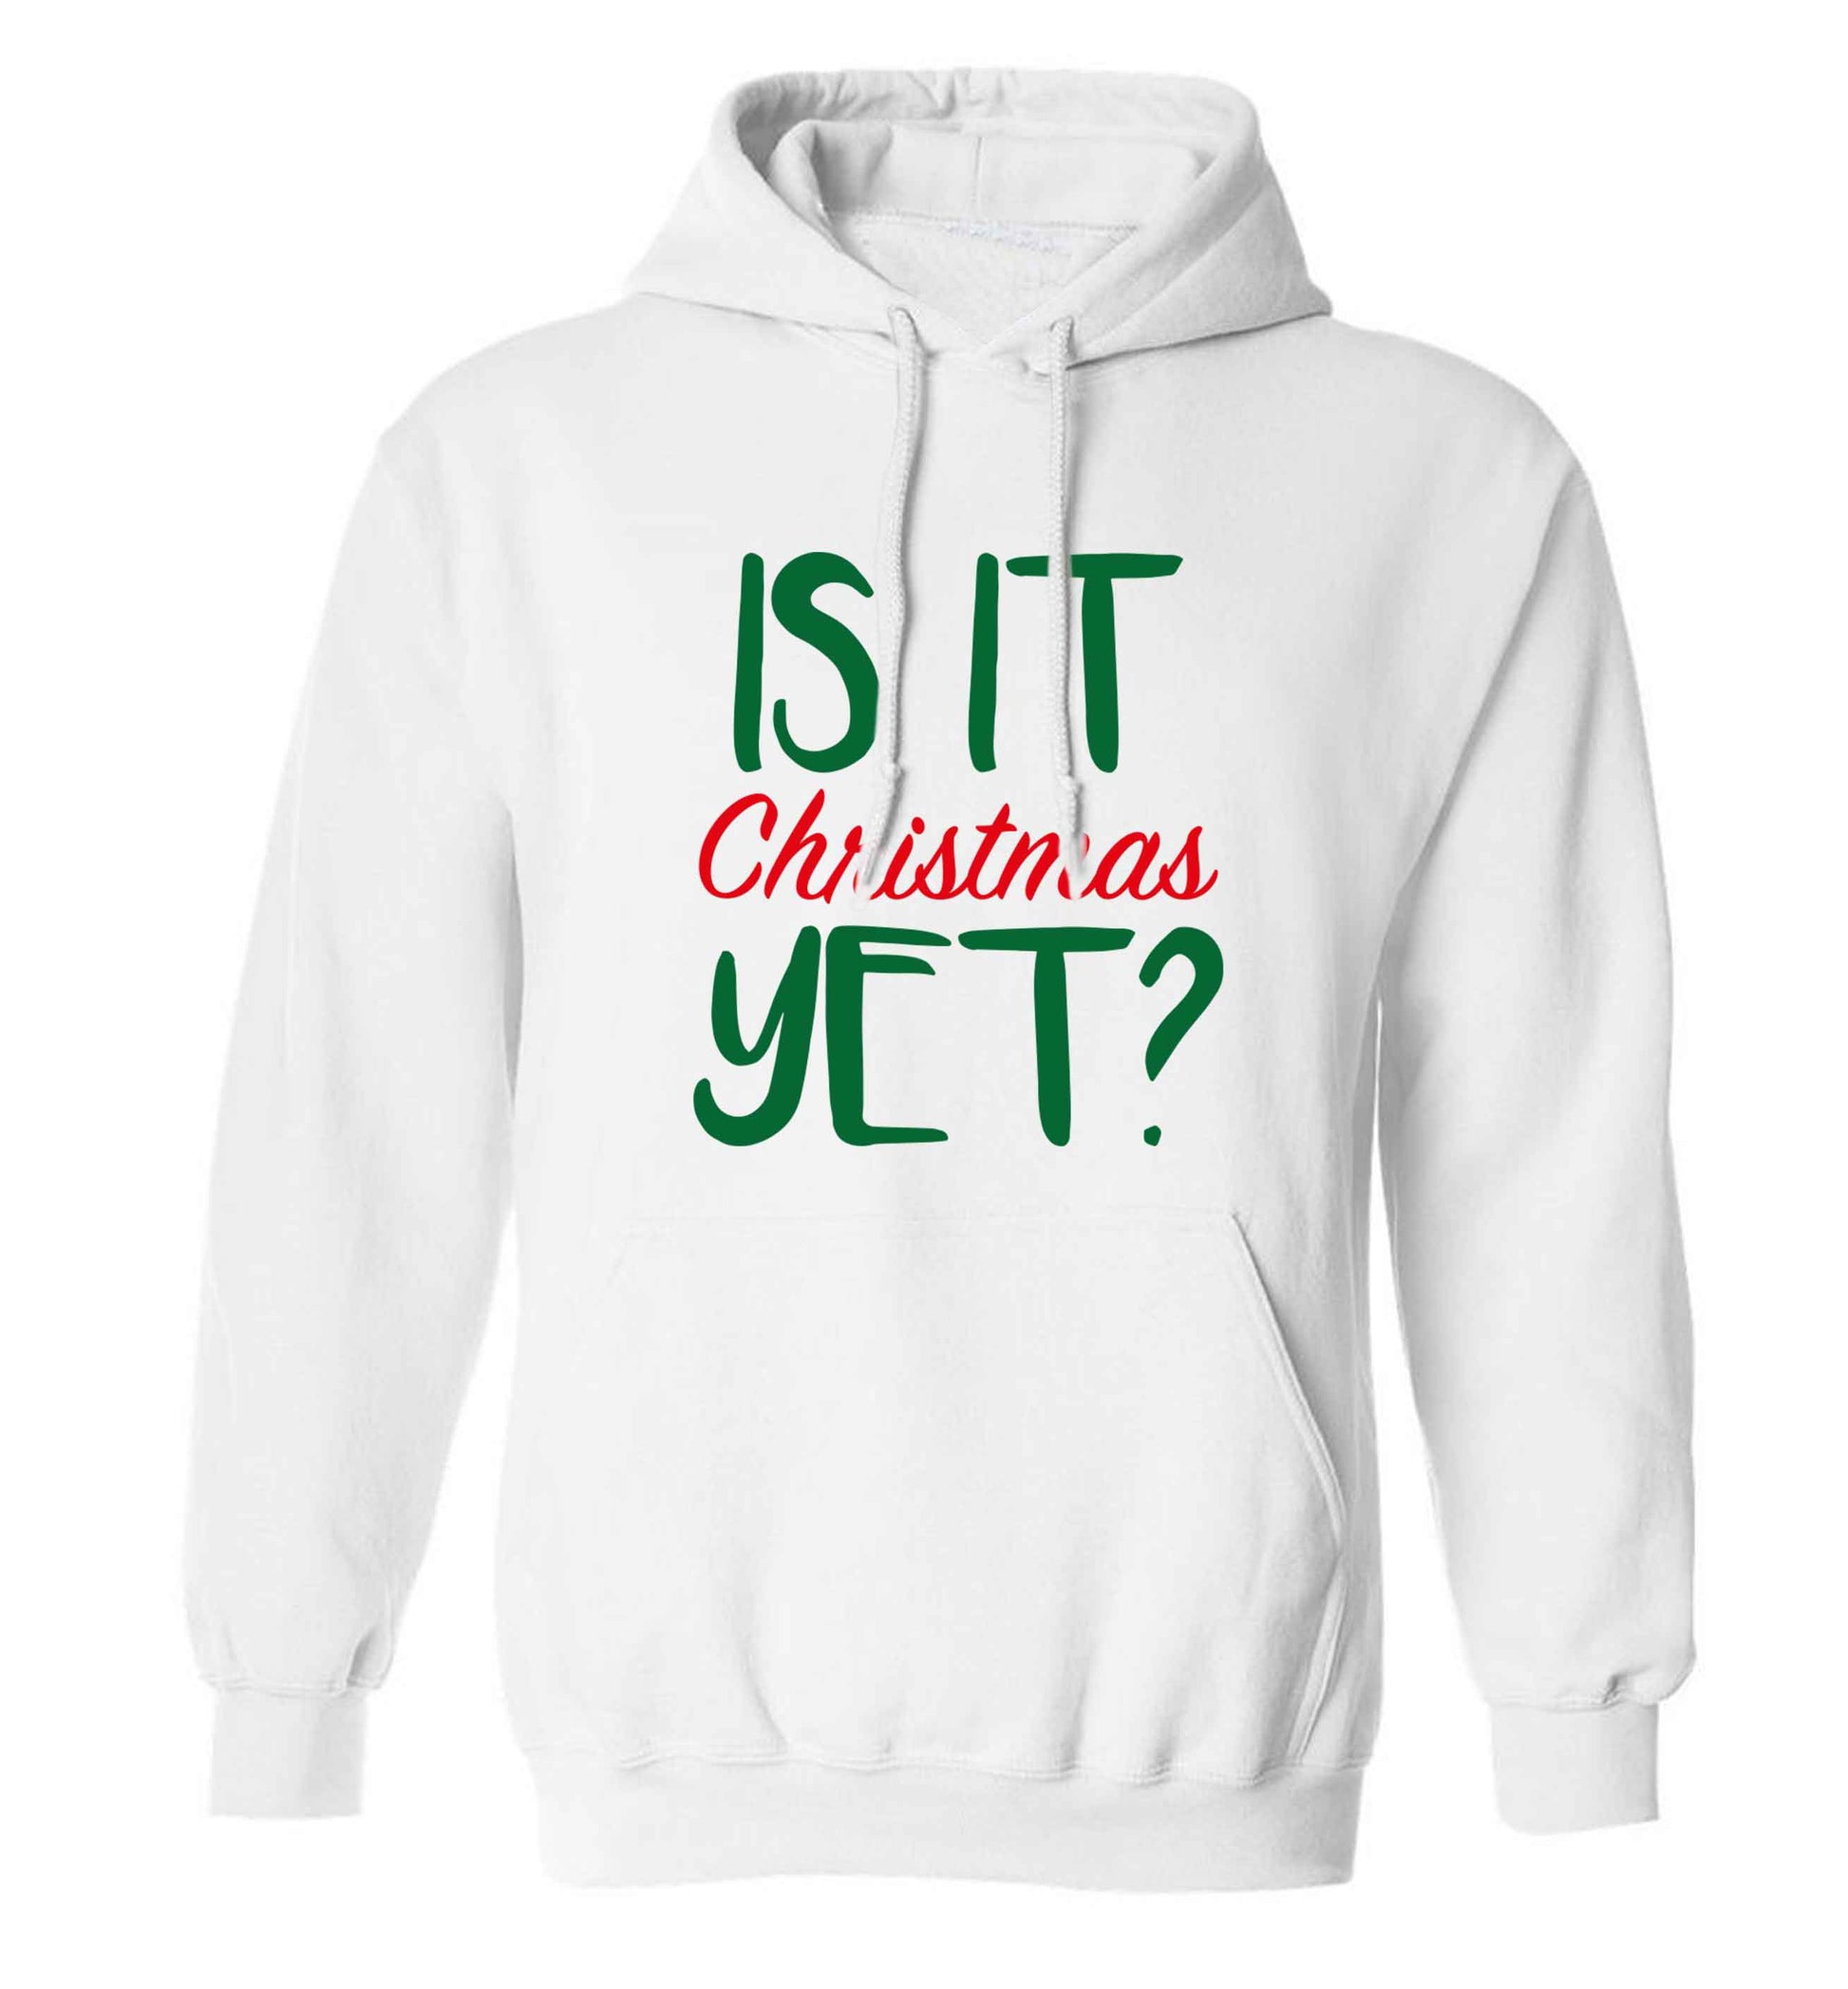 Is it Christmas yet? adults unisex white hoodie 2XL